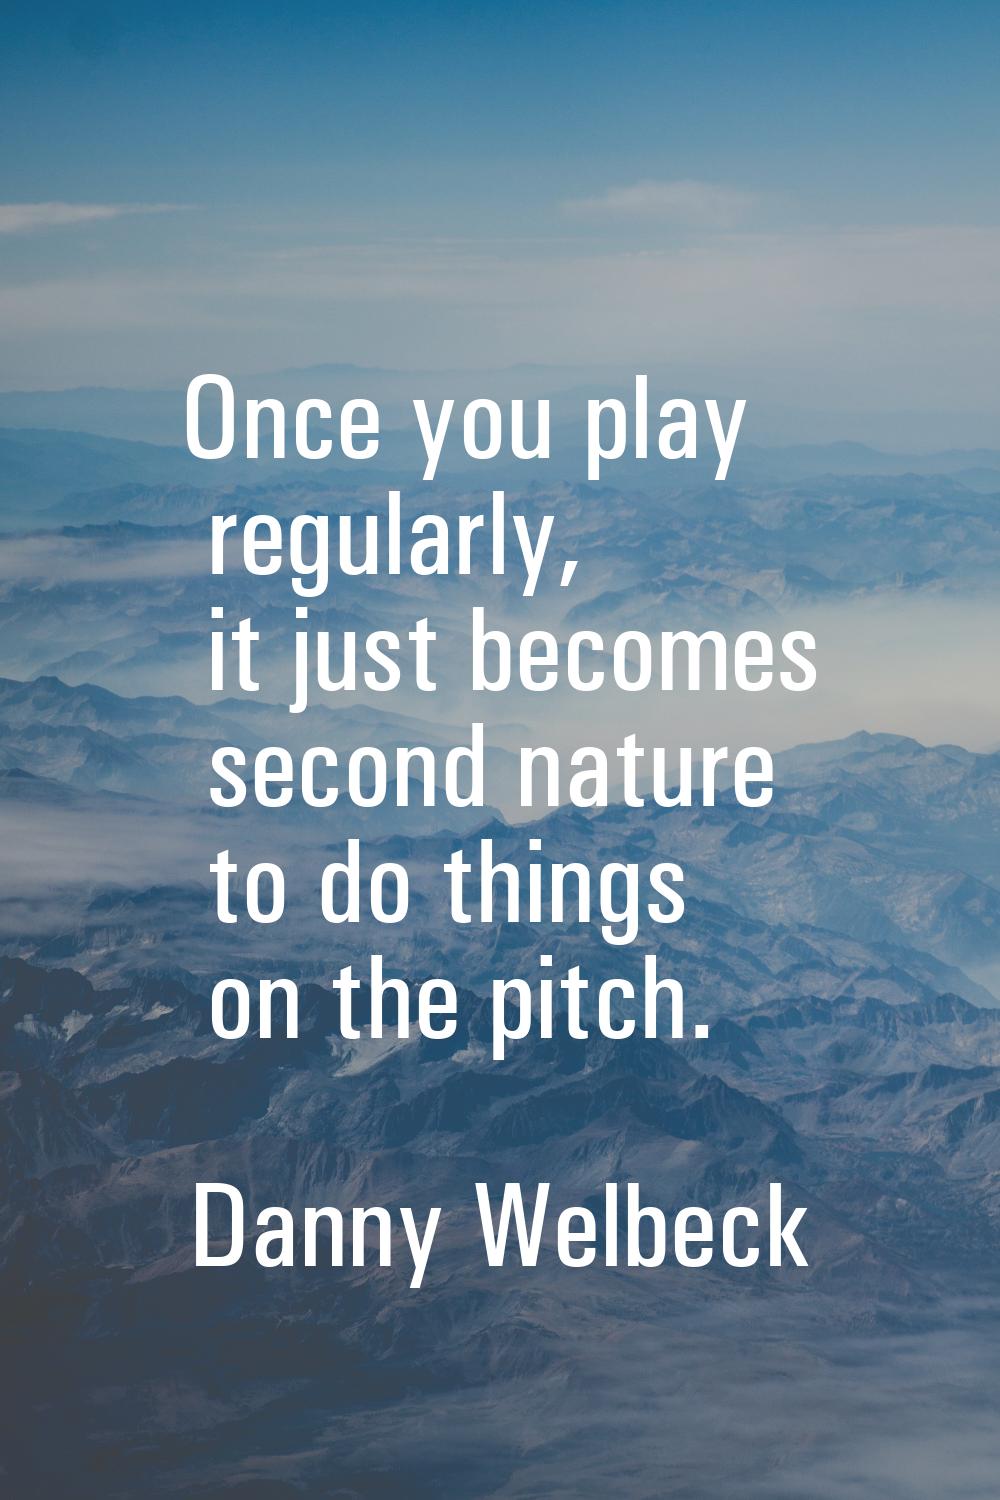 Once you play regularly, it just becomes second nature to do things on the pitch.